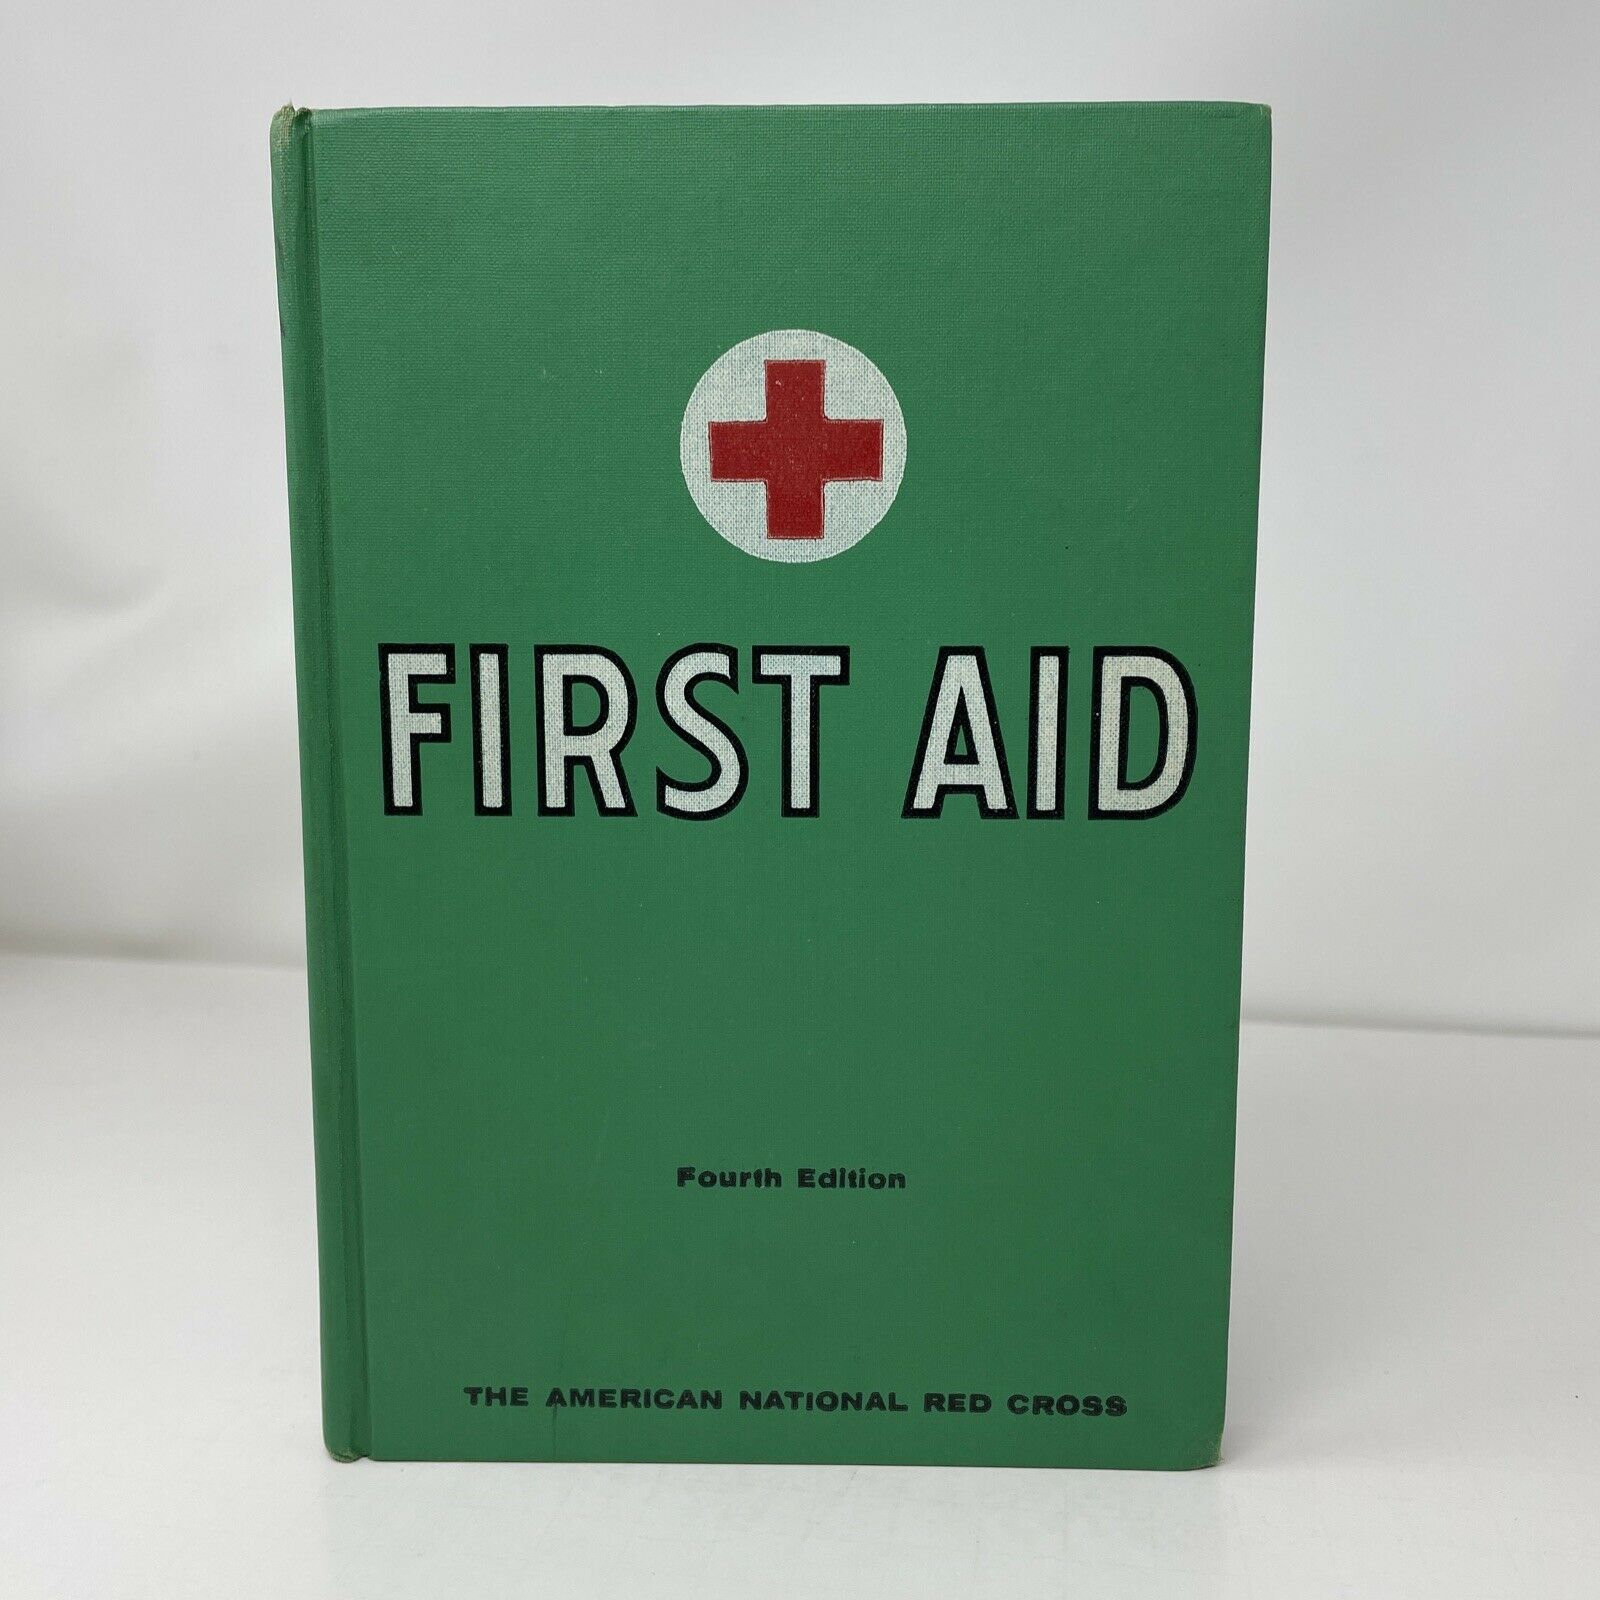 Vintage American National Red Cross First Aid Book Fourth Edition 1957